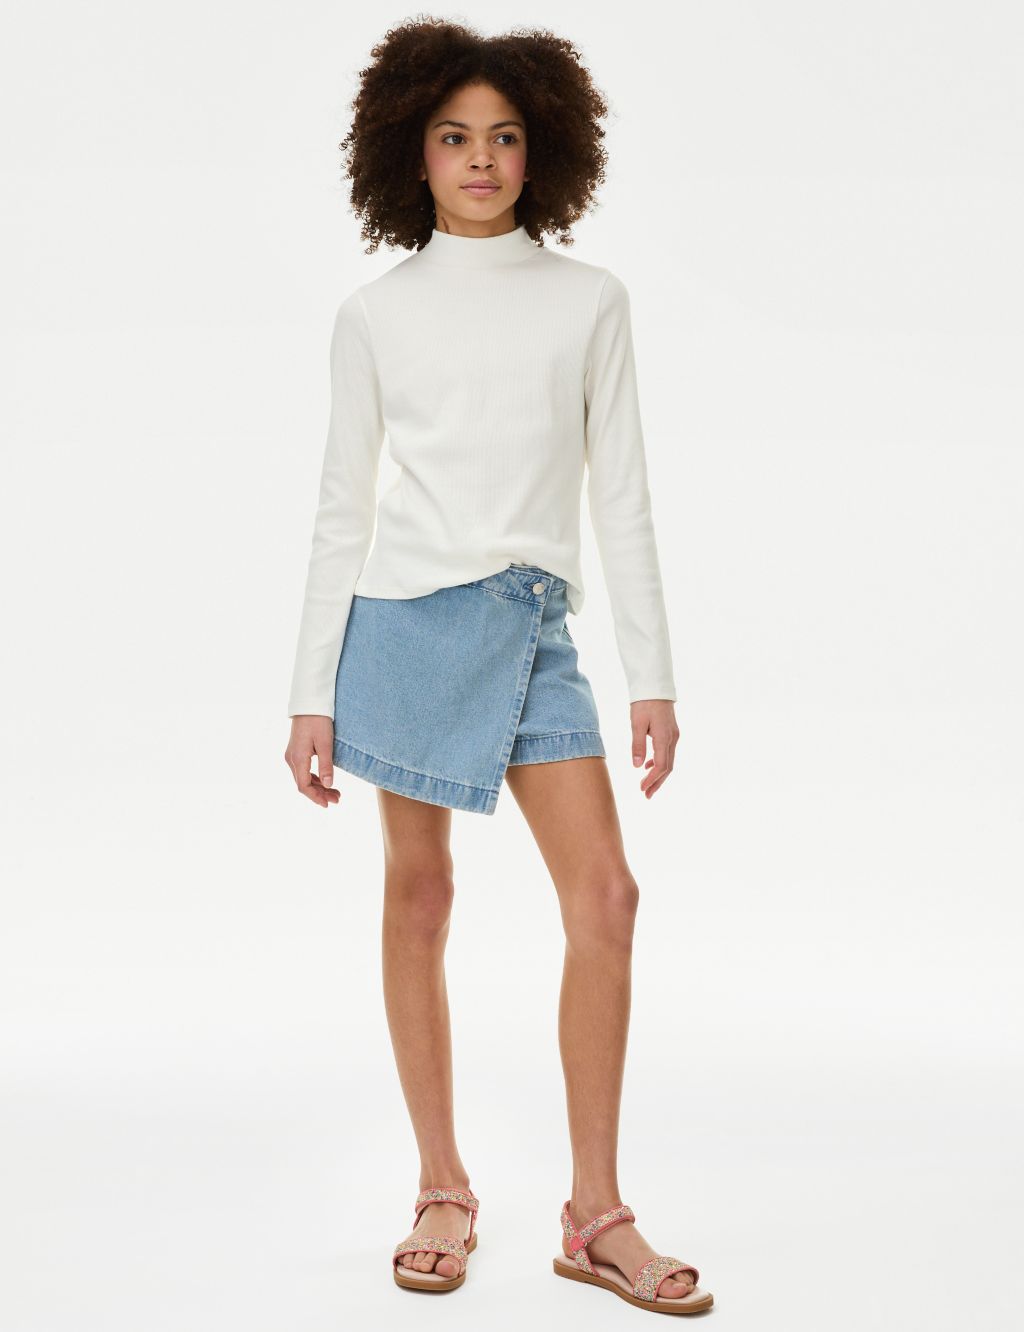 Cotton Rich High Neck Top (6-16 Yrs) image 1